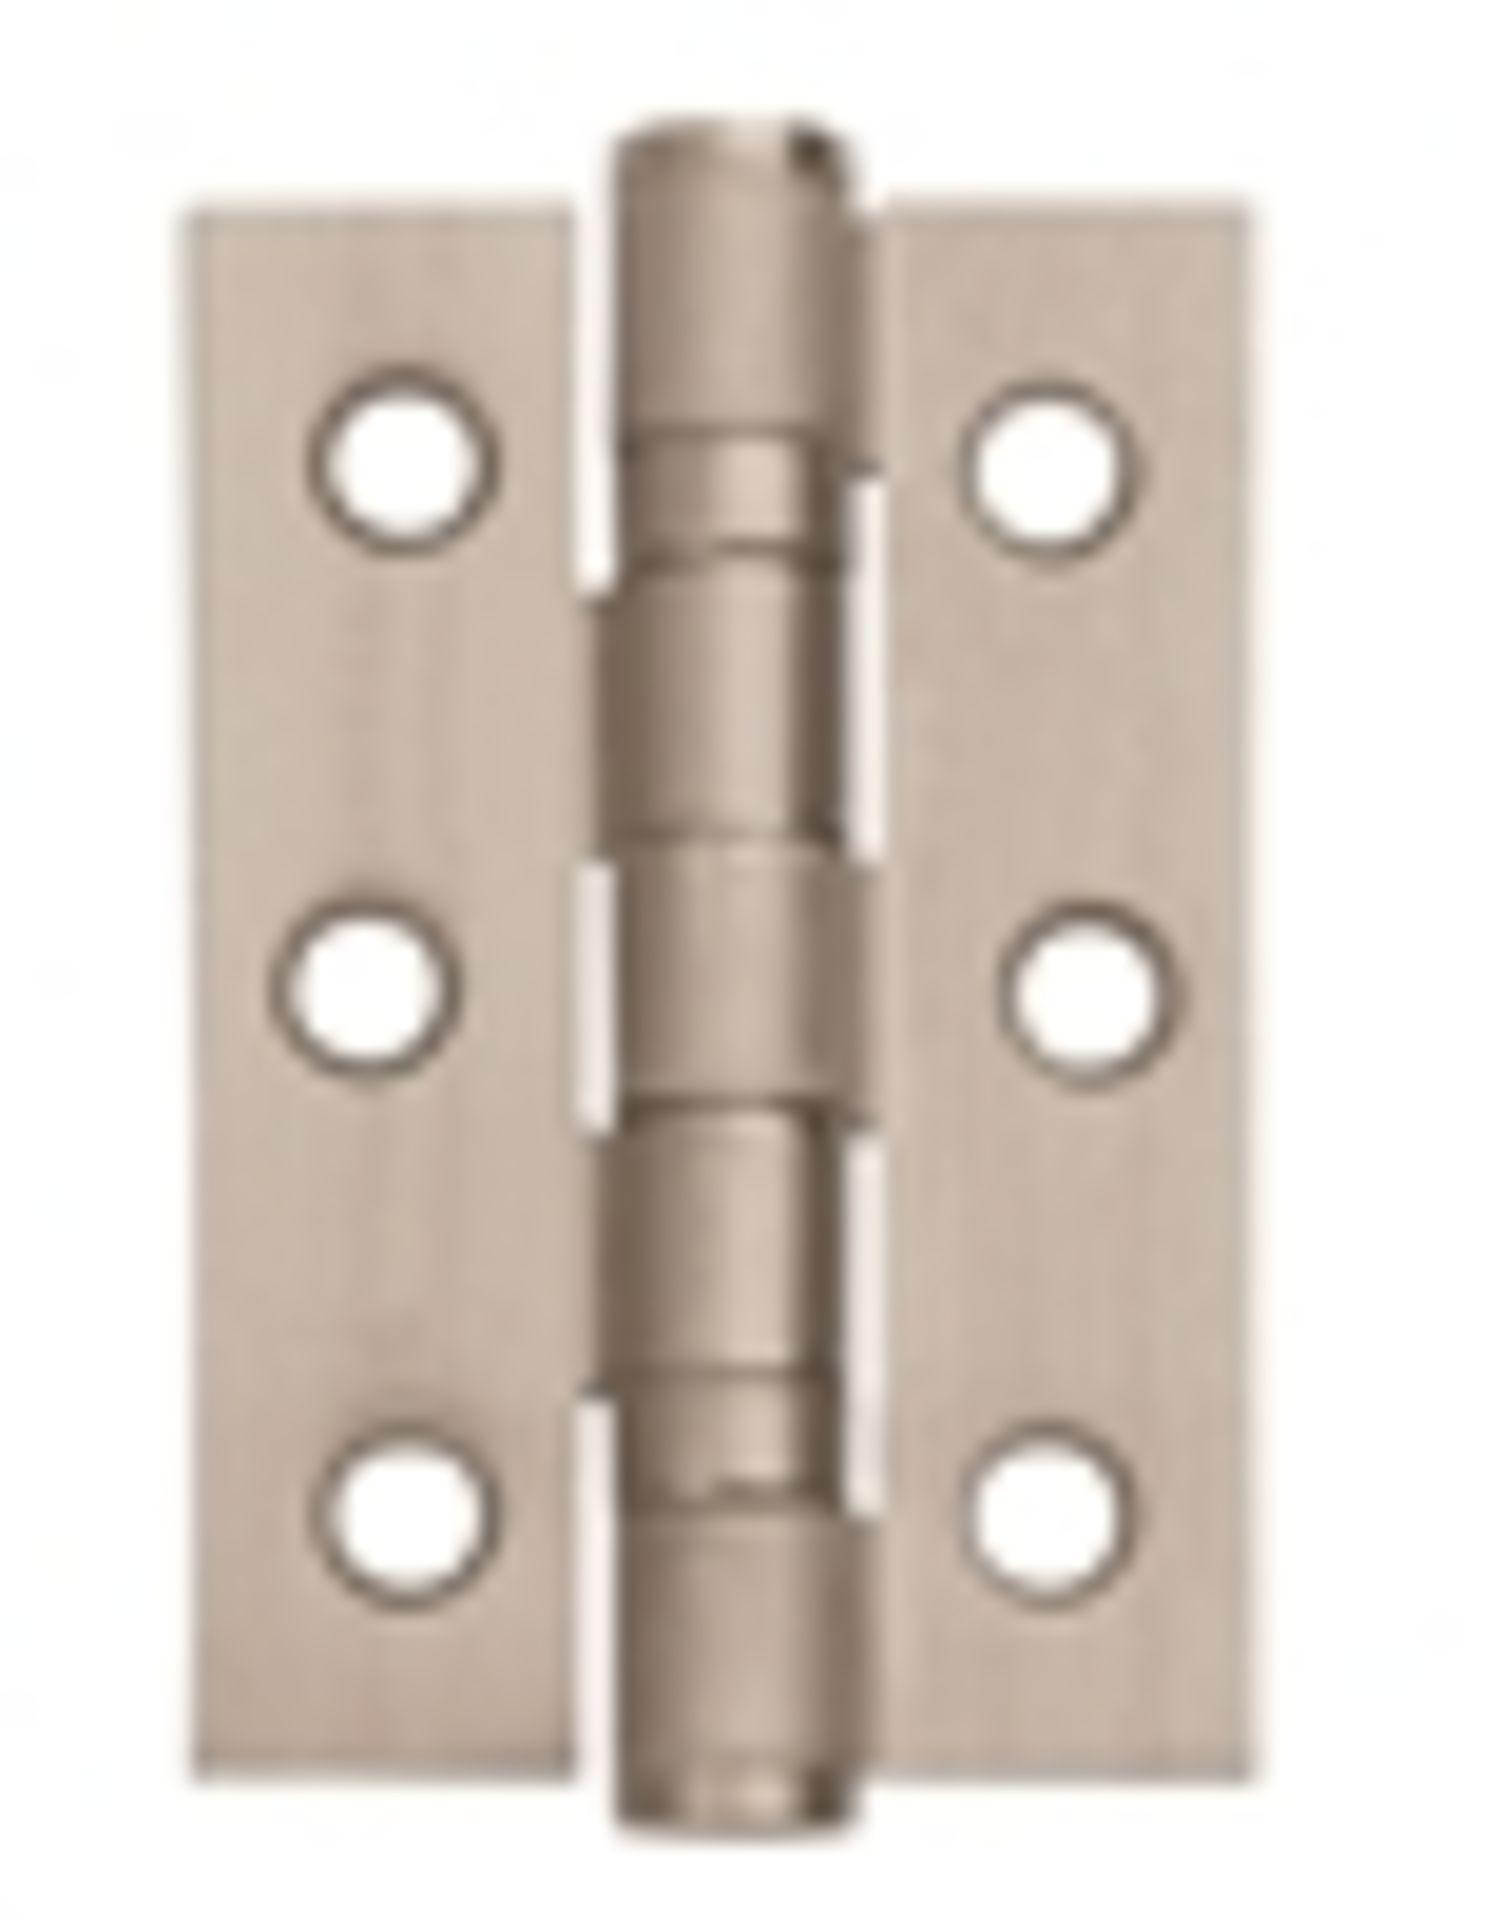 4 Pairs Dale Hardware Chronos Door Handle. 3660 Smart Pack Inc Hinges And Smart Lock - Image 2 of 2